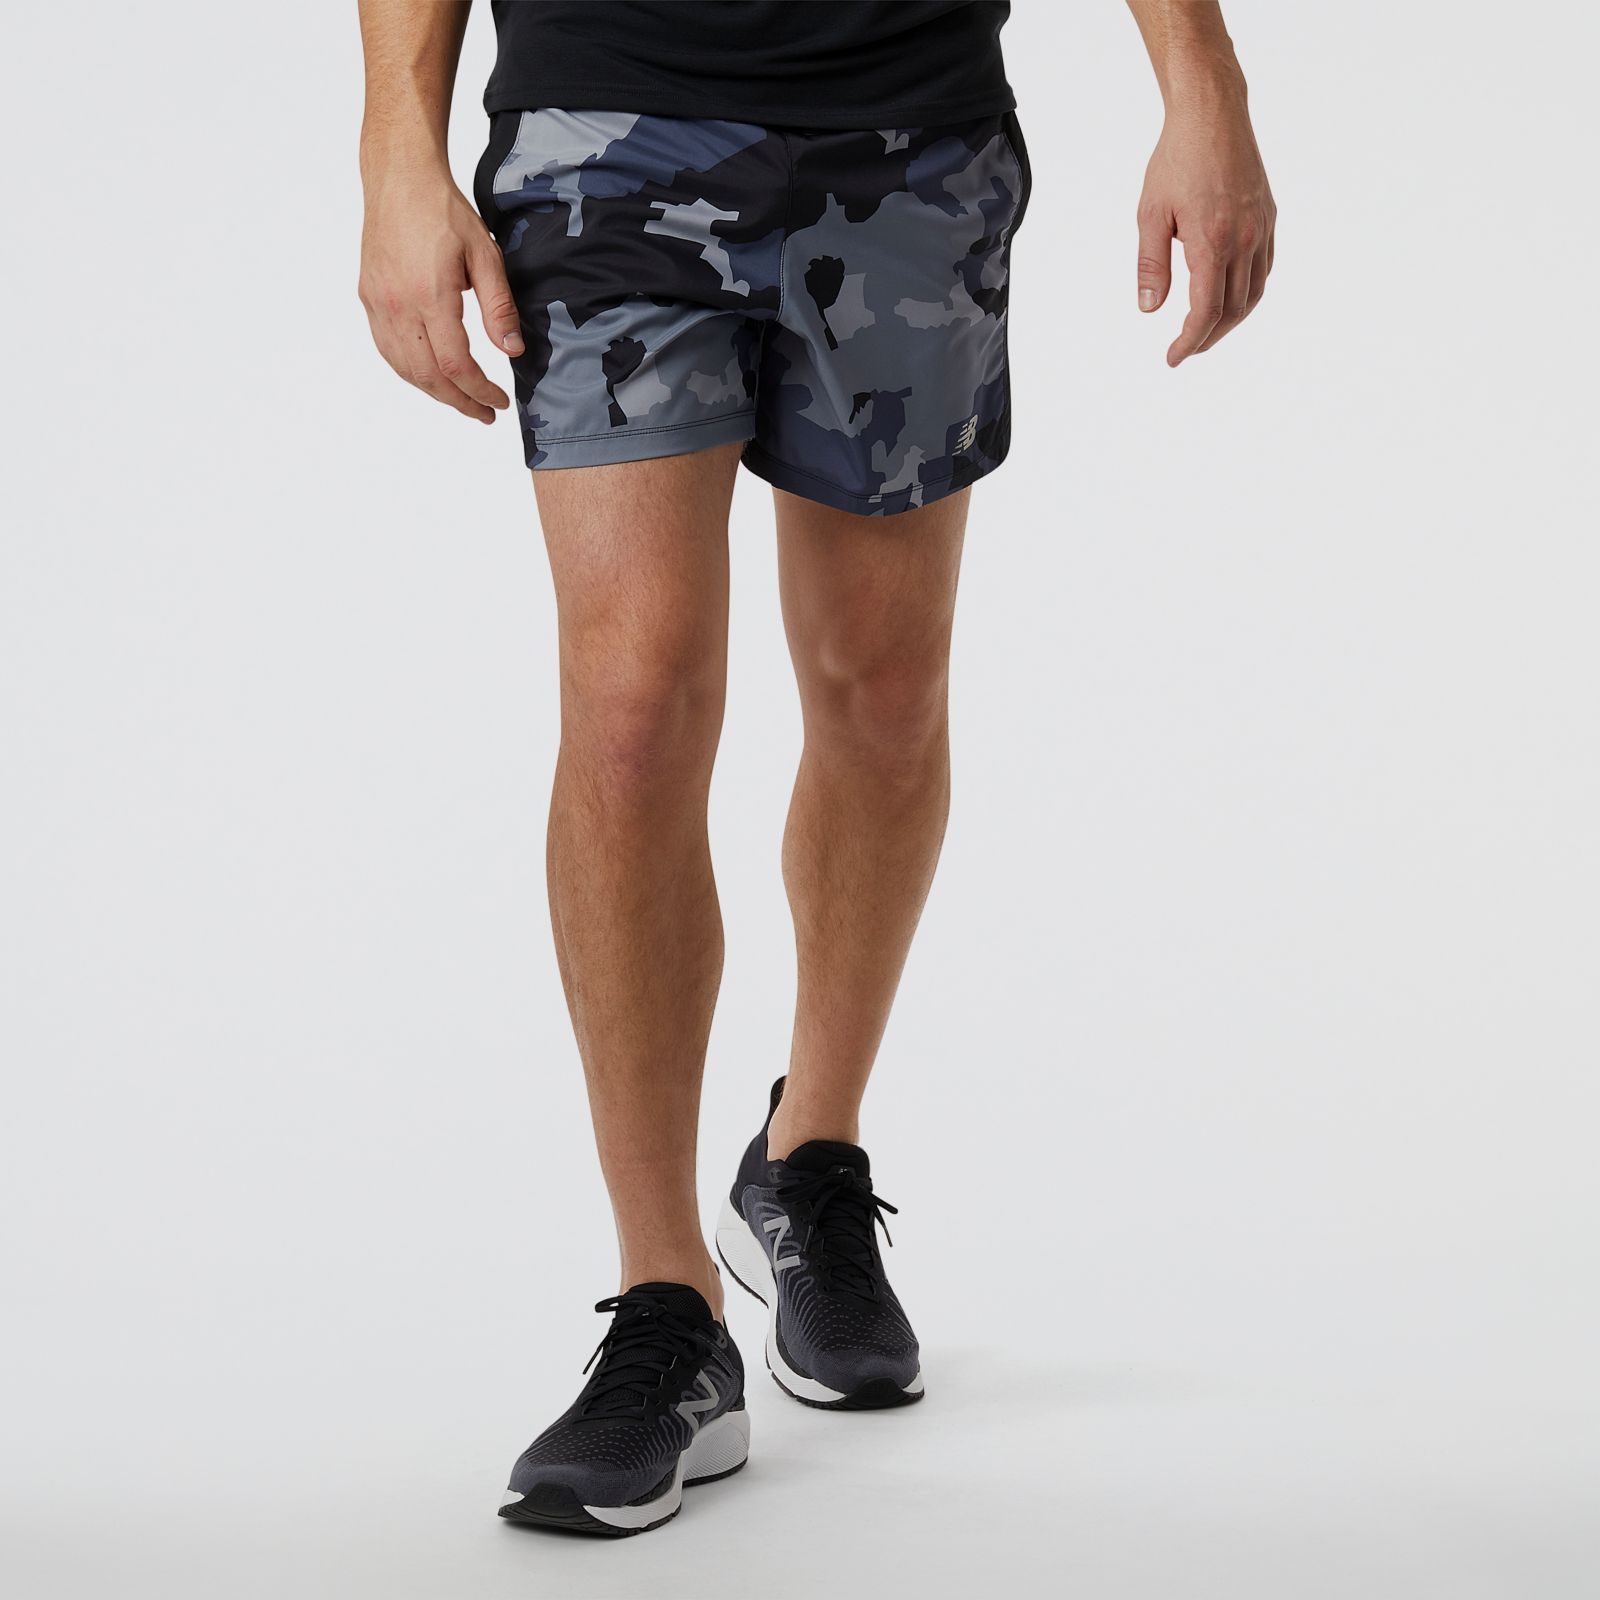 New Balance Short Printed Accelerate MS23229, Black/Grey, swatch